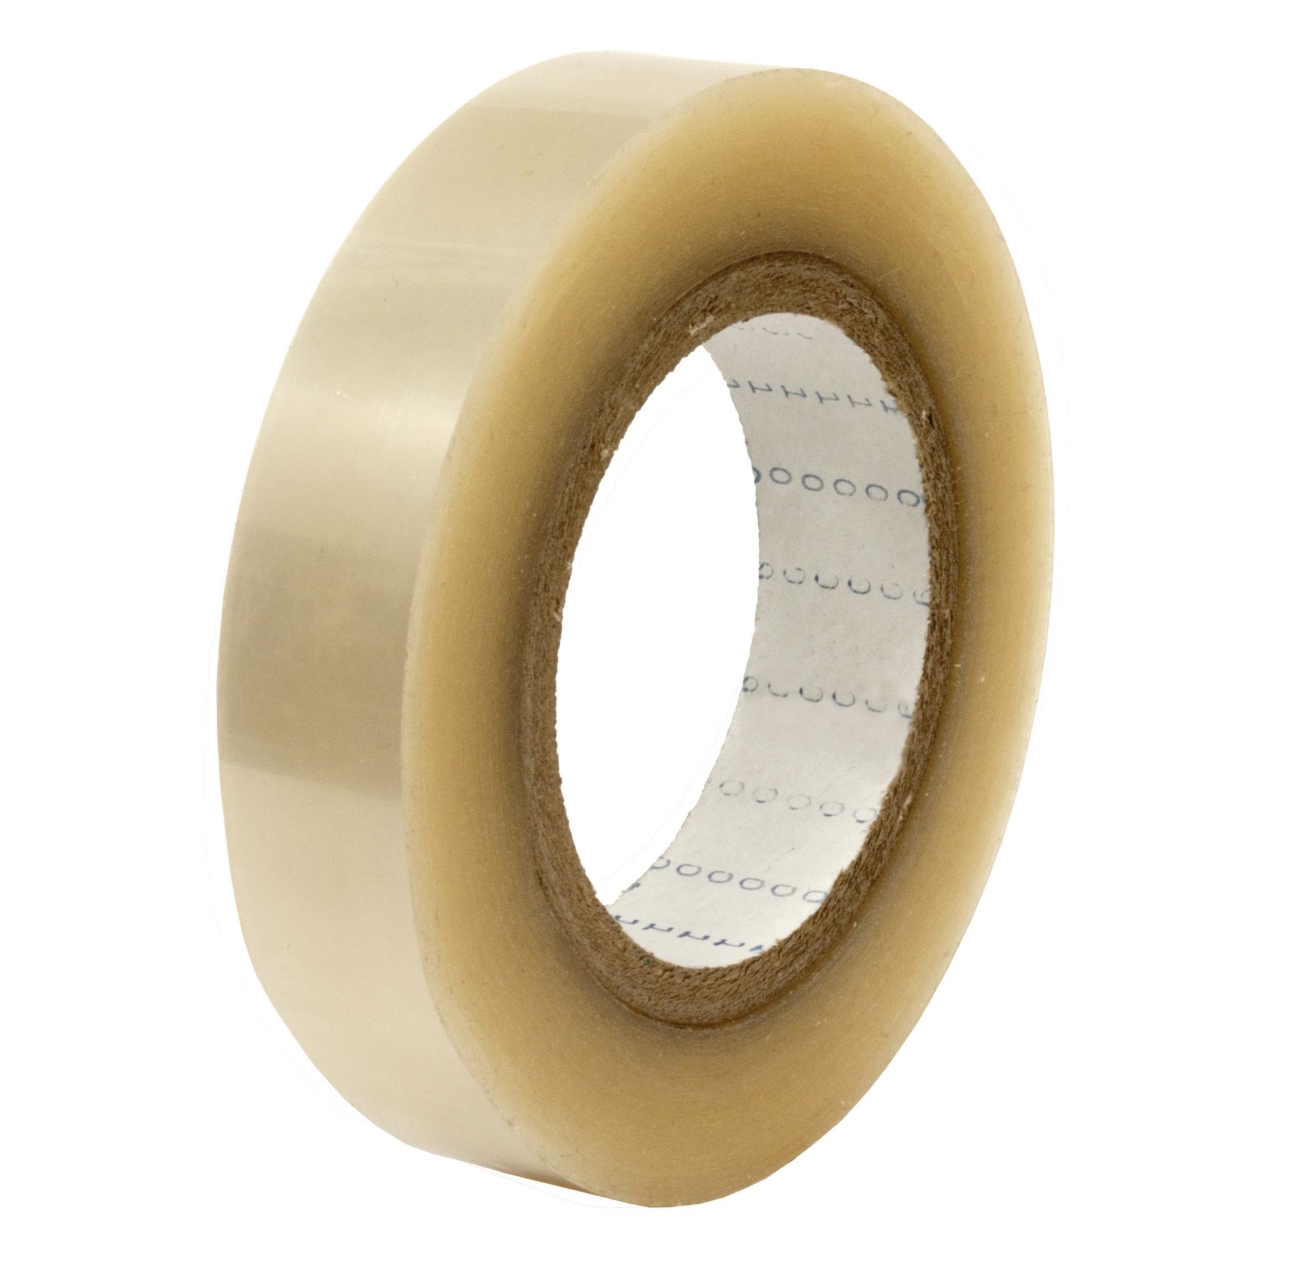 S-K-S dubbelzijdige kleefband met polyester drager 960, transparant, 15 mm x 66 m, siliconen kleefband, 0,085 mm